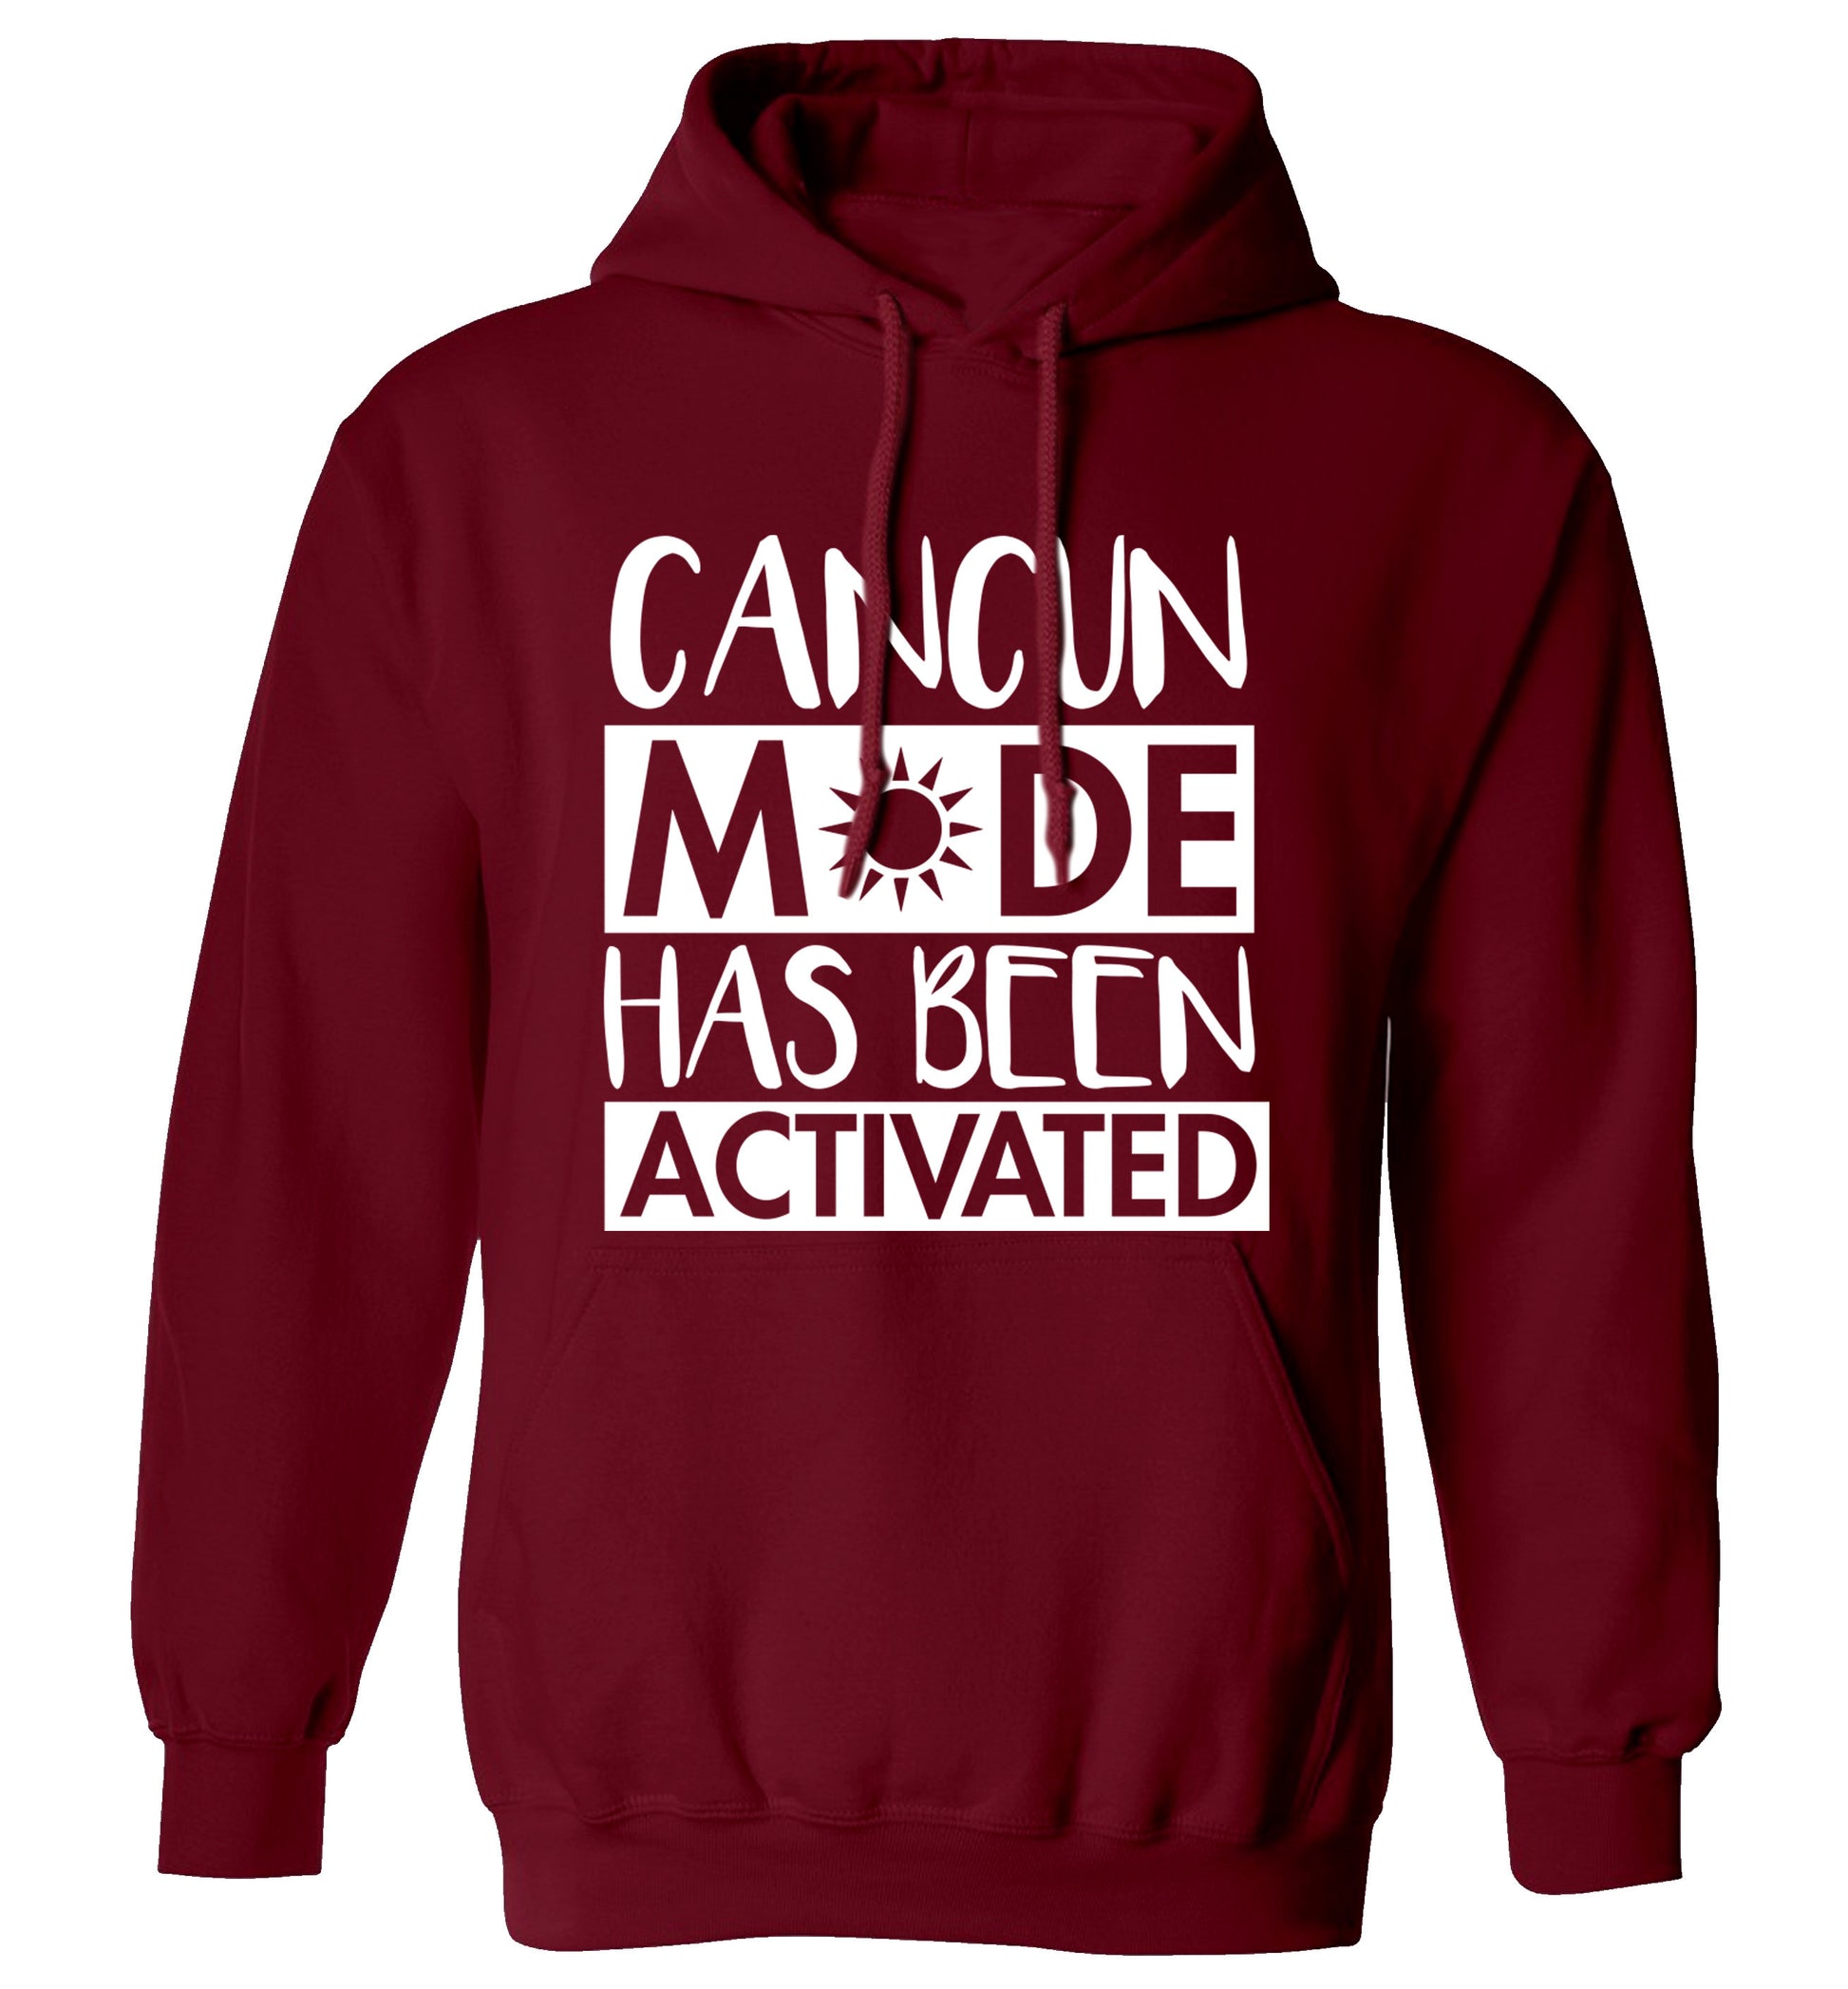 Cancun mode has been activated adults unisex maroon hoodie 2XL